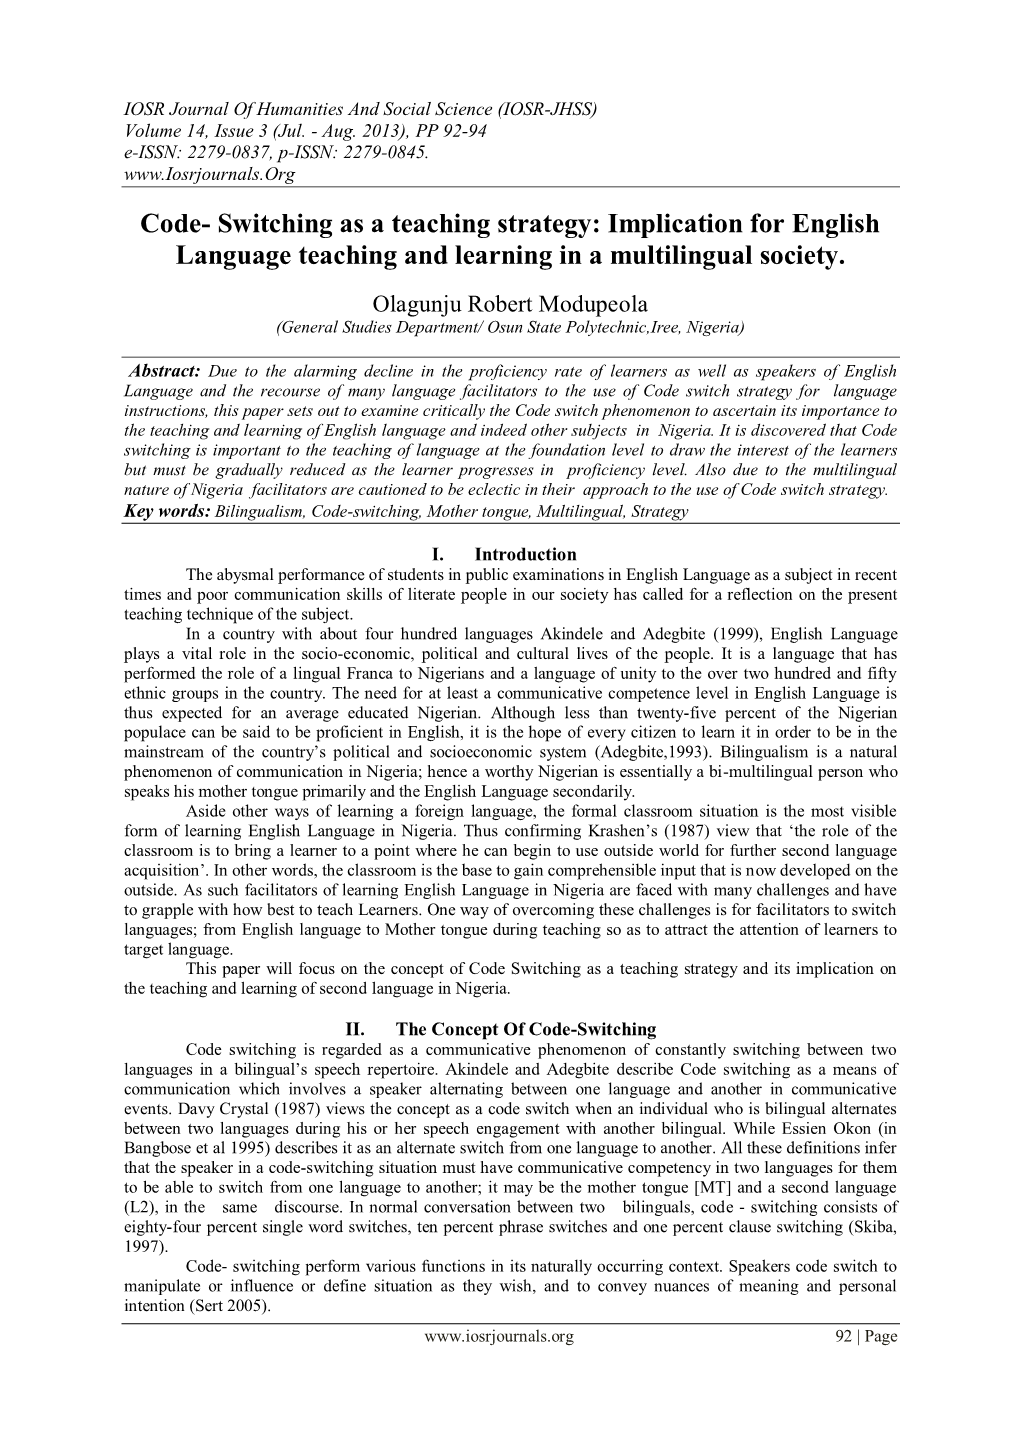 Code- Switching As a Teaching Strategy: Implication for English Language Teaching and Learning in a Multilingual Society